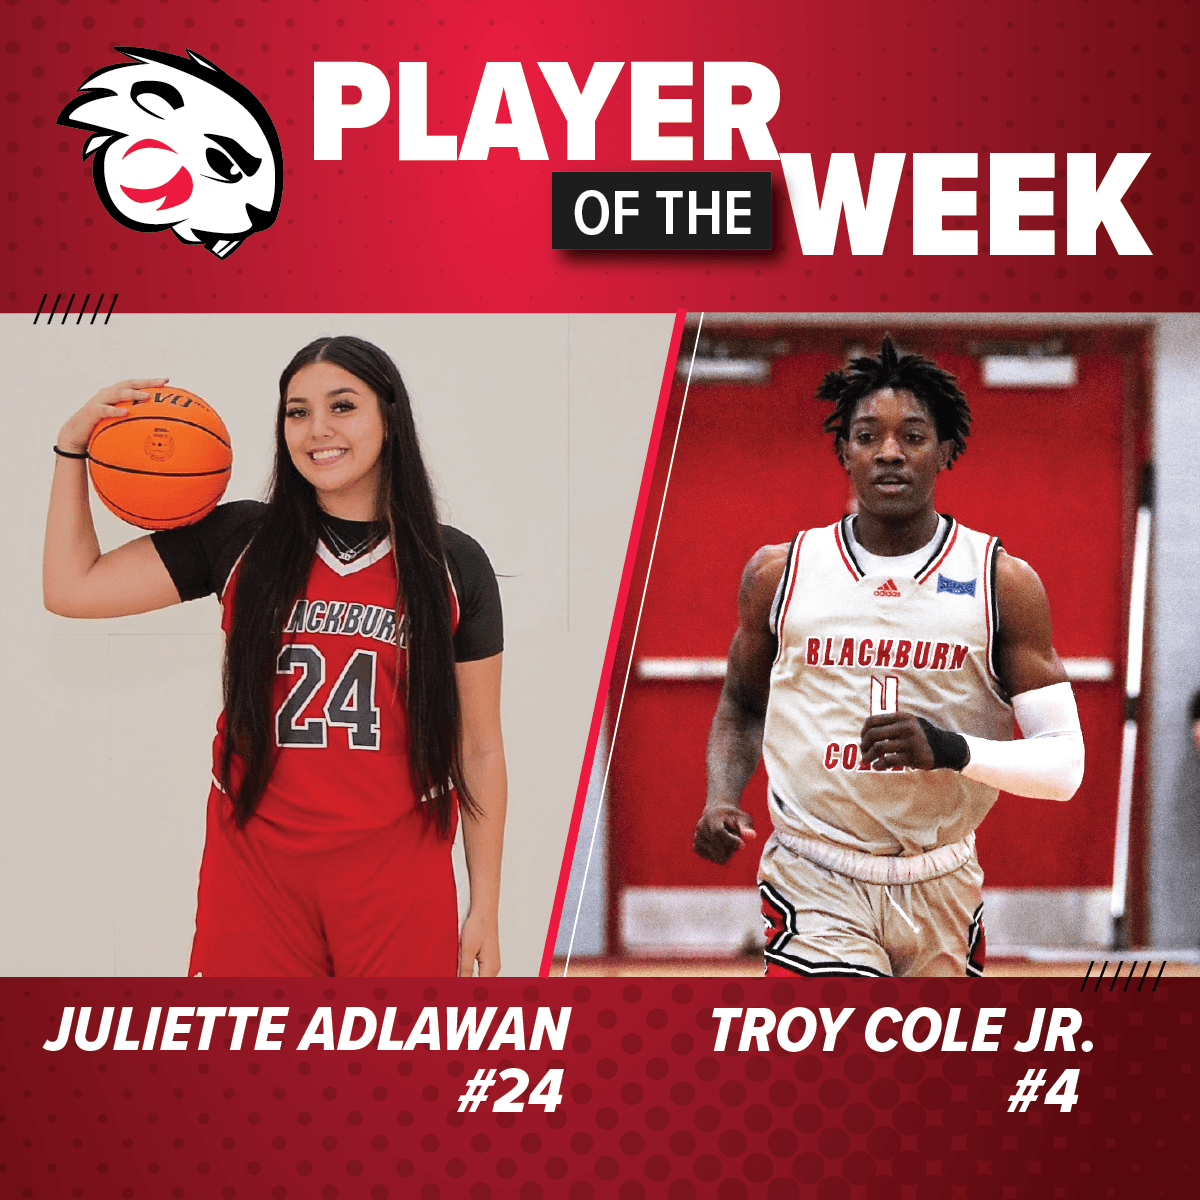 Congratulations to the BC Athletes of the Week - Juliette Adlawan (Anchorage, AK) and Troy Cole Jr. (Donaldsonville, LA).

#blackburncollege #sliaction #d3hoops #believeinit #gobeavers